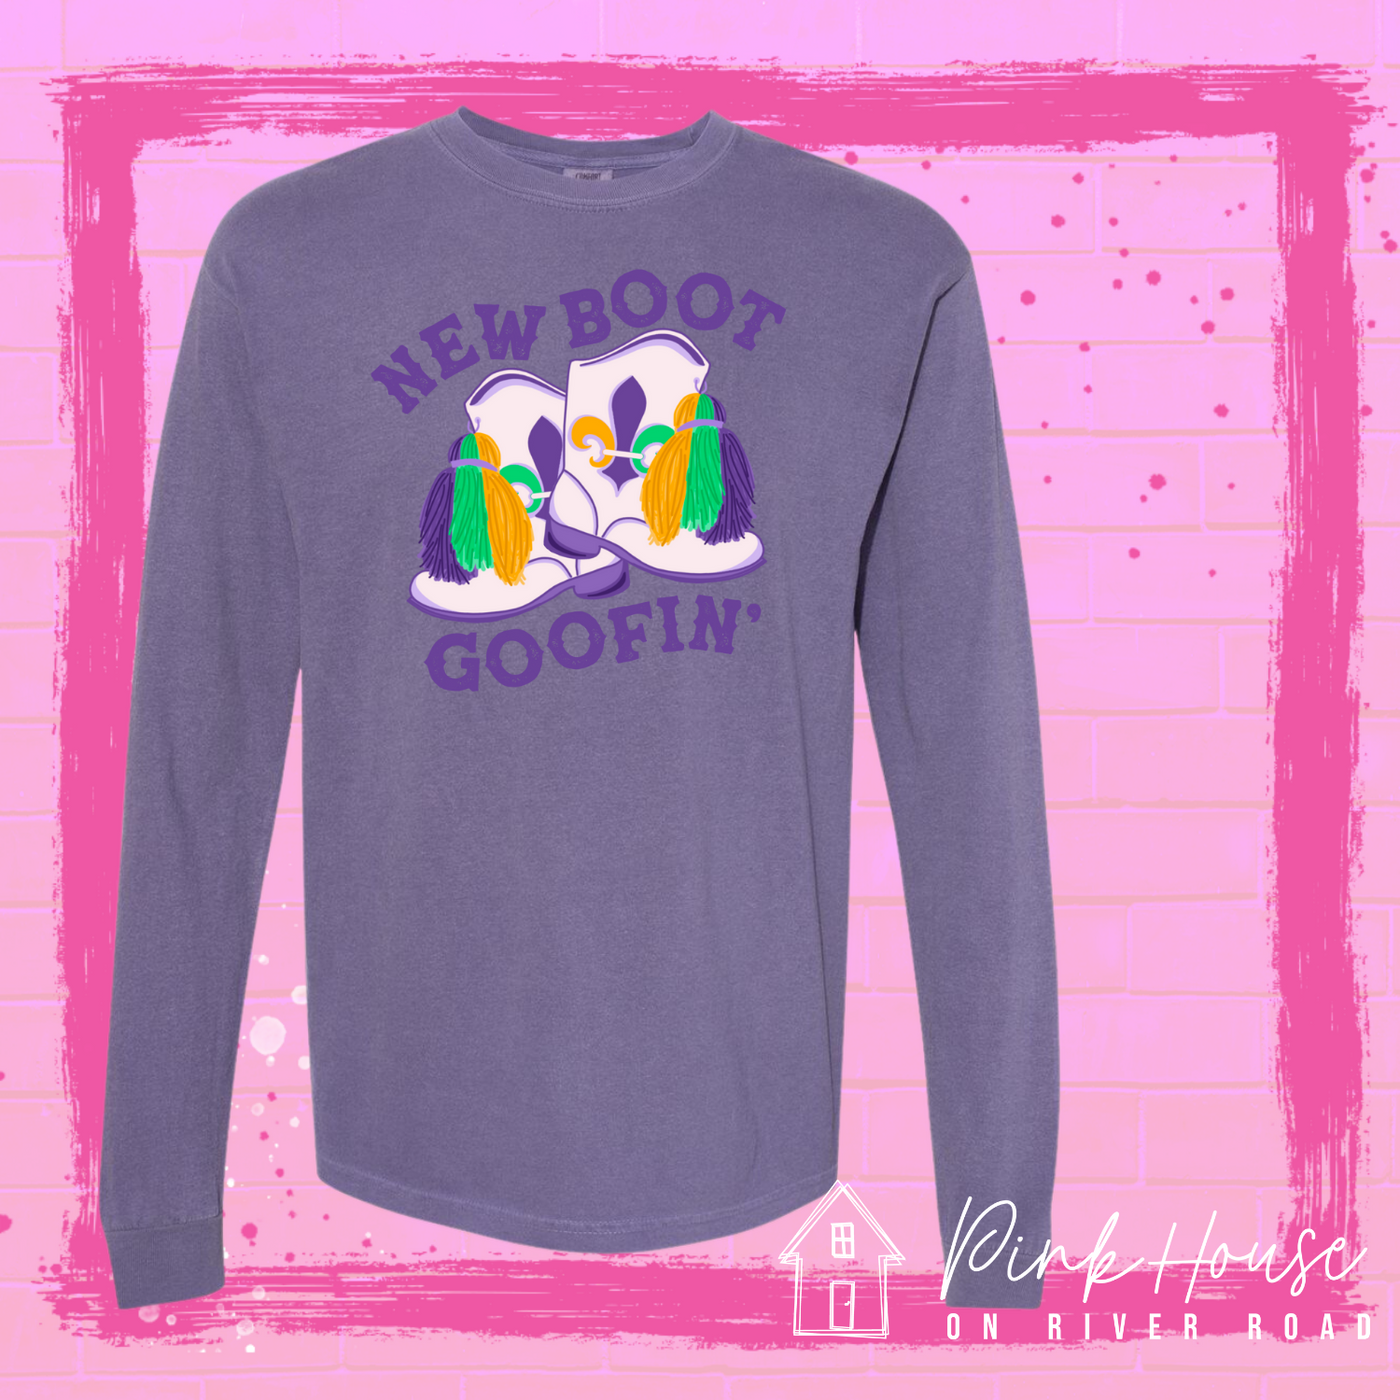 A purple long sleeve tee with a graphic. Graphic is of a pair of majorette boots, the boots have a tassel and fleur de lis both in gold, green and purple. the words New Boot are above the boots and the word goofin' is below thee boots the words are in purple.